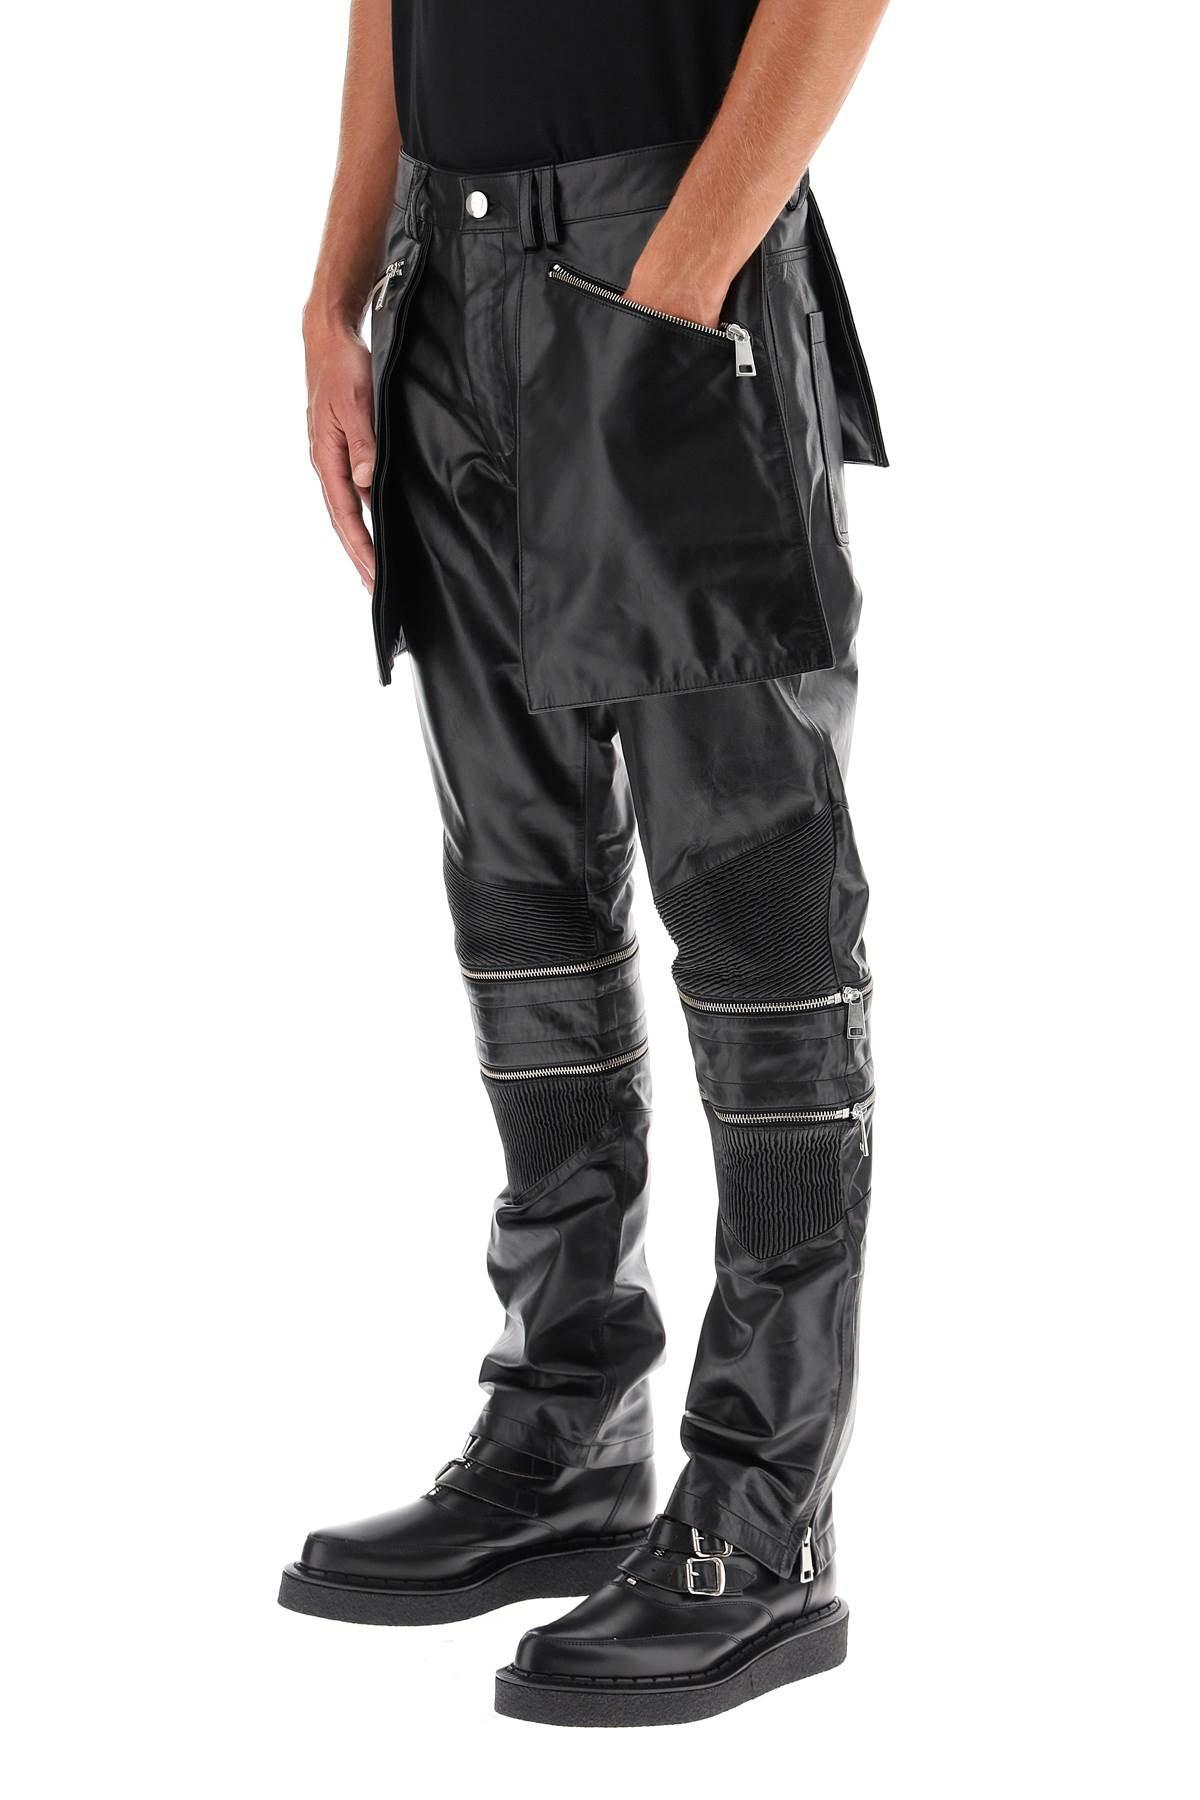 Youth In Balaclava Convertible Leather Biker Trouer Stylemyle Boys Clothing Pants Leather Pants 